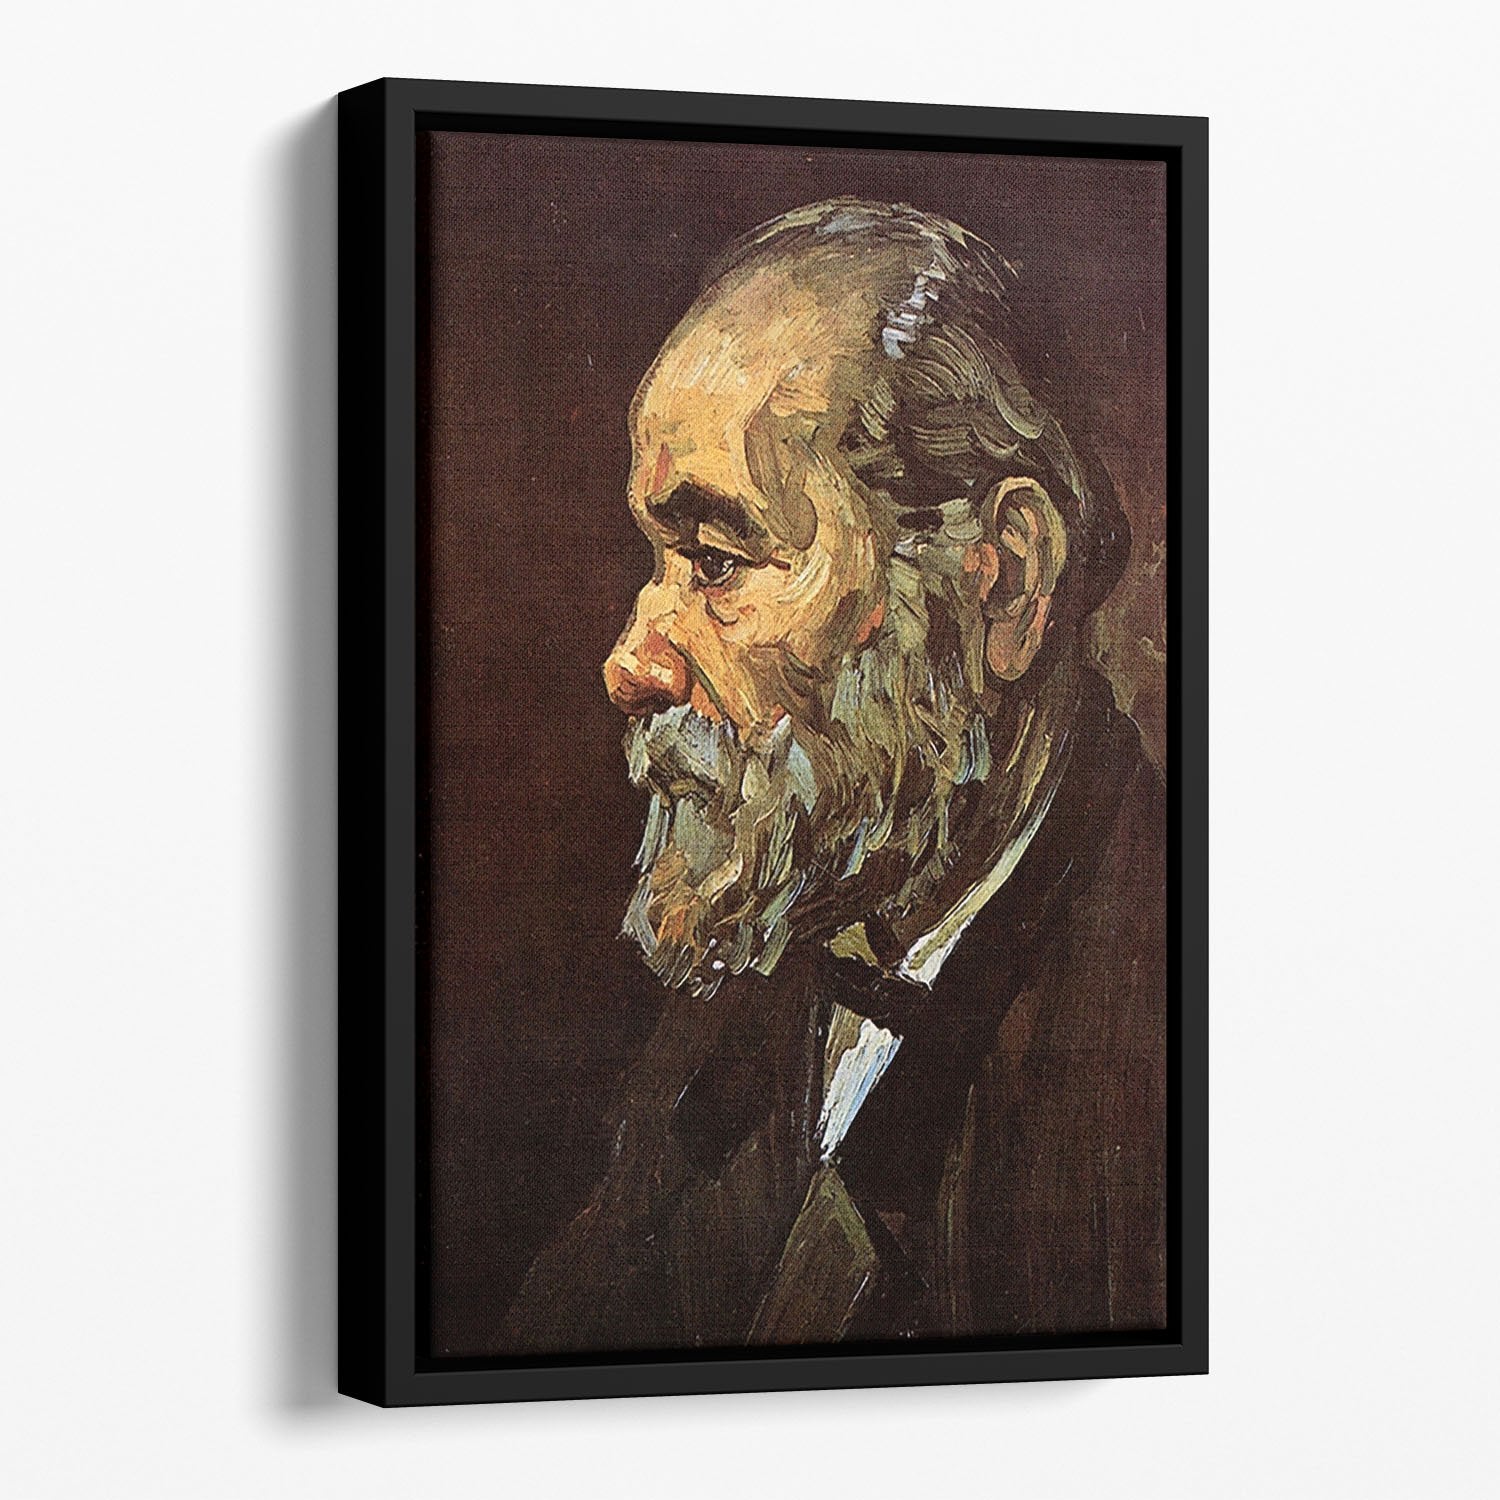 Portrait of an Old Man with Beard by Van Gogh Floating Framed Canvas